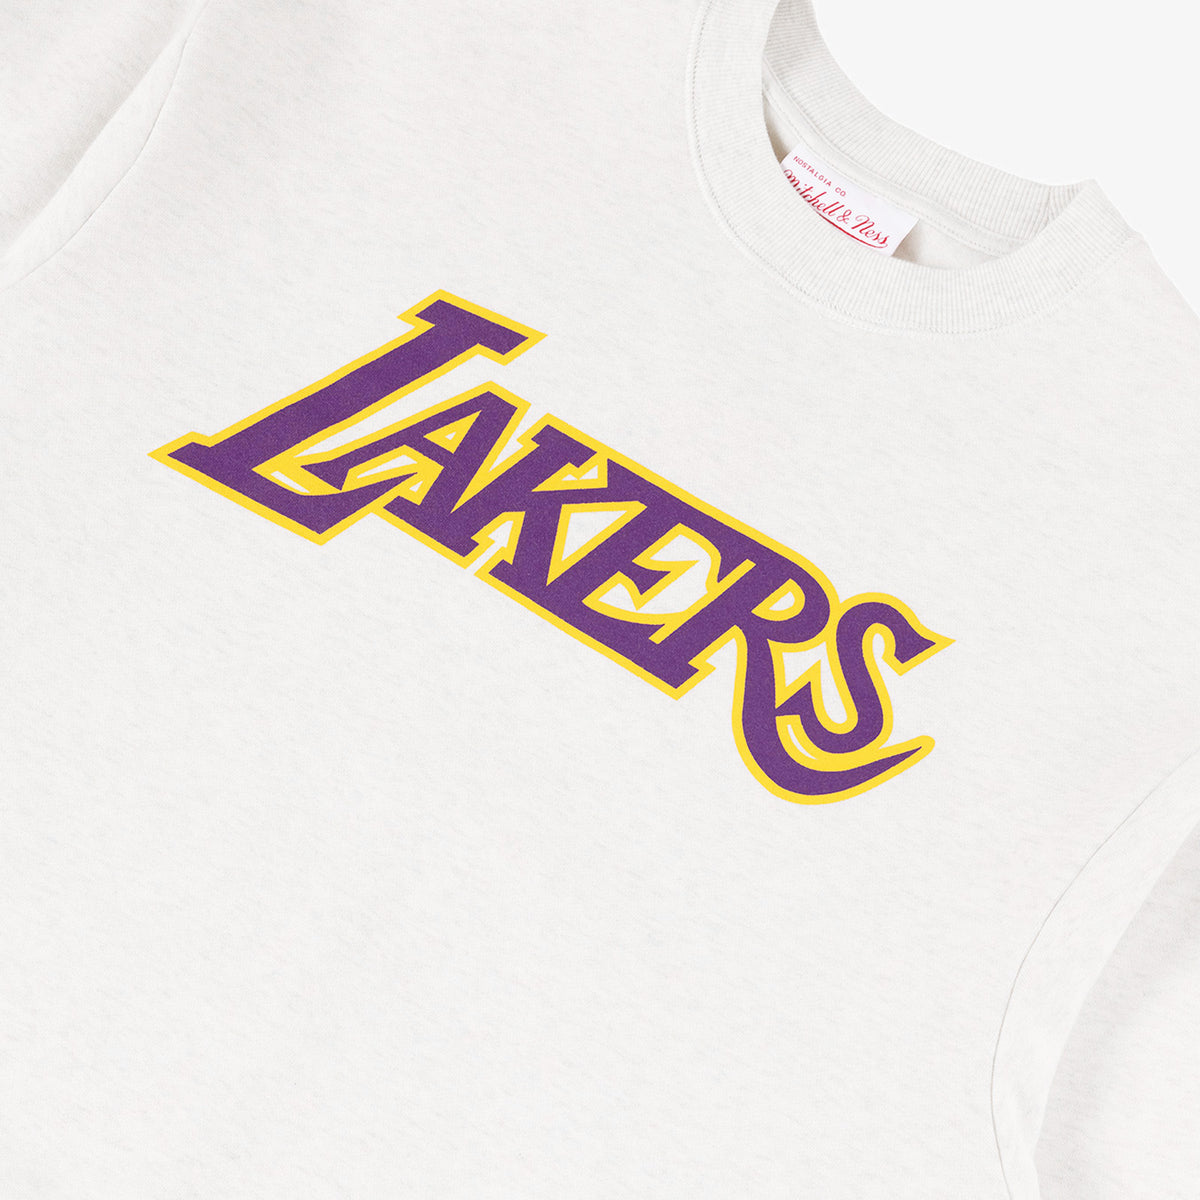 Los Angeles Lakers Nike Women's Courtside French Terry Pullover